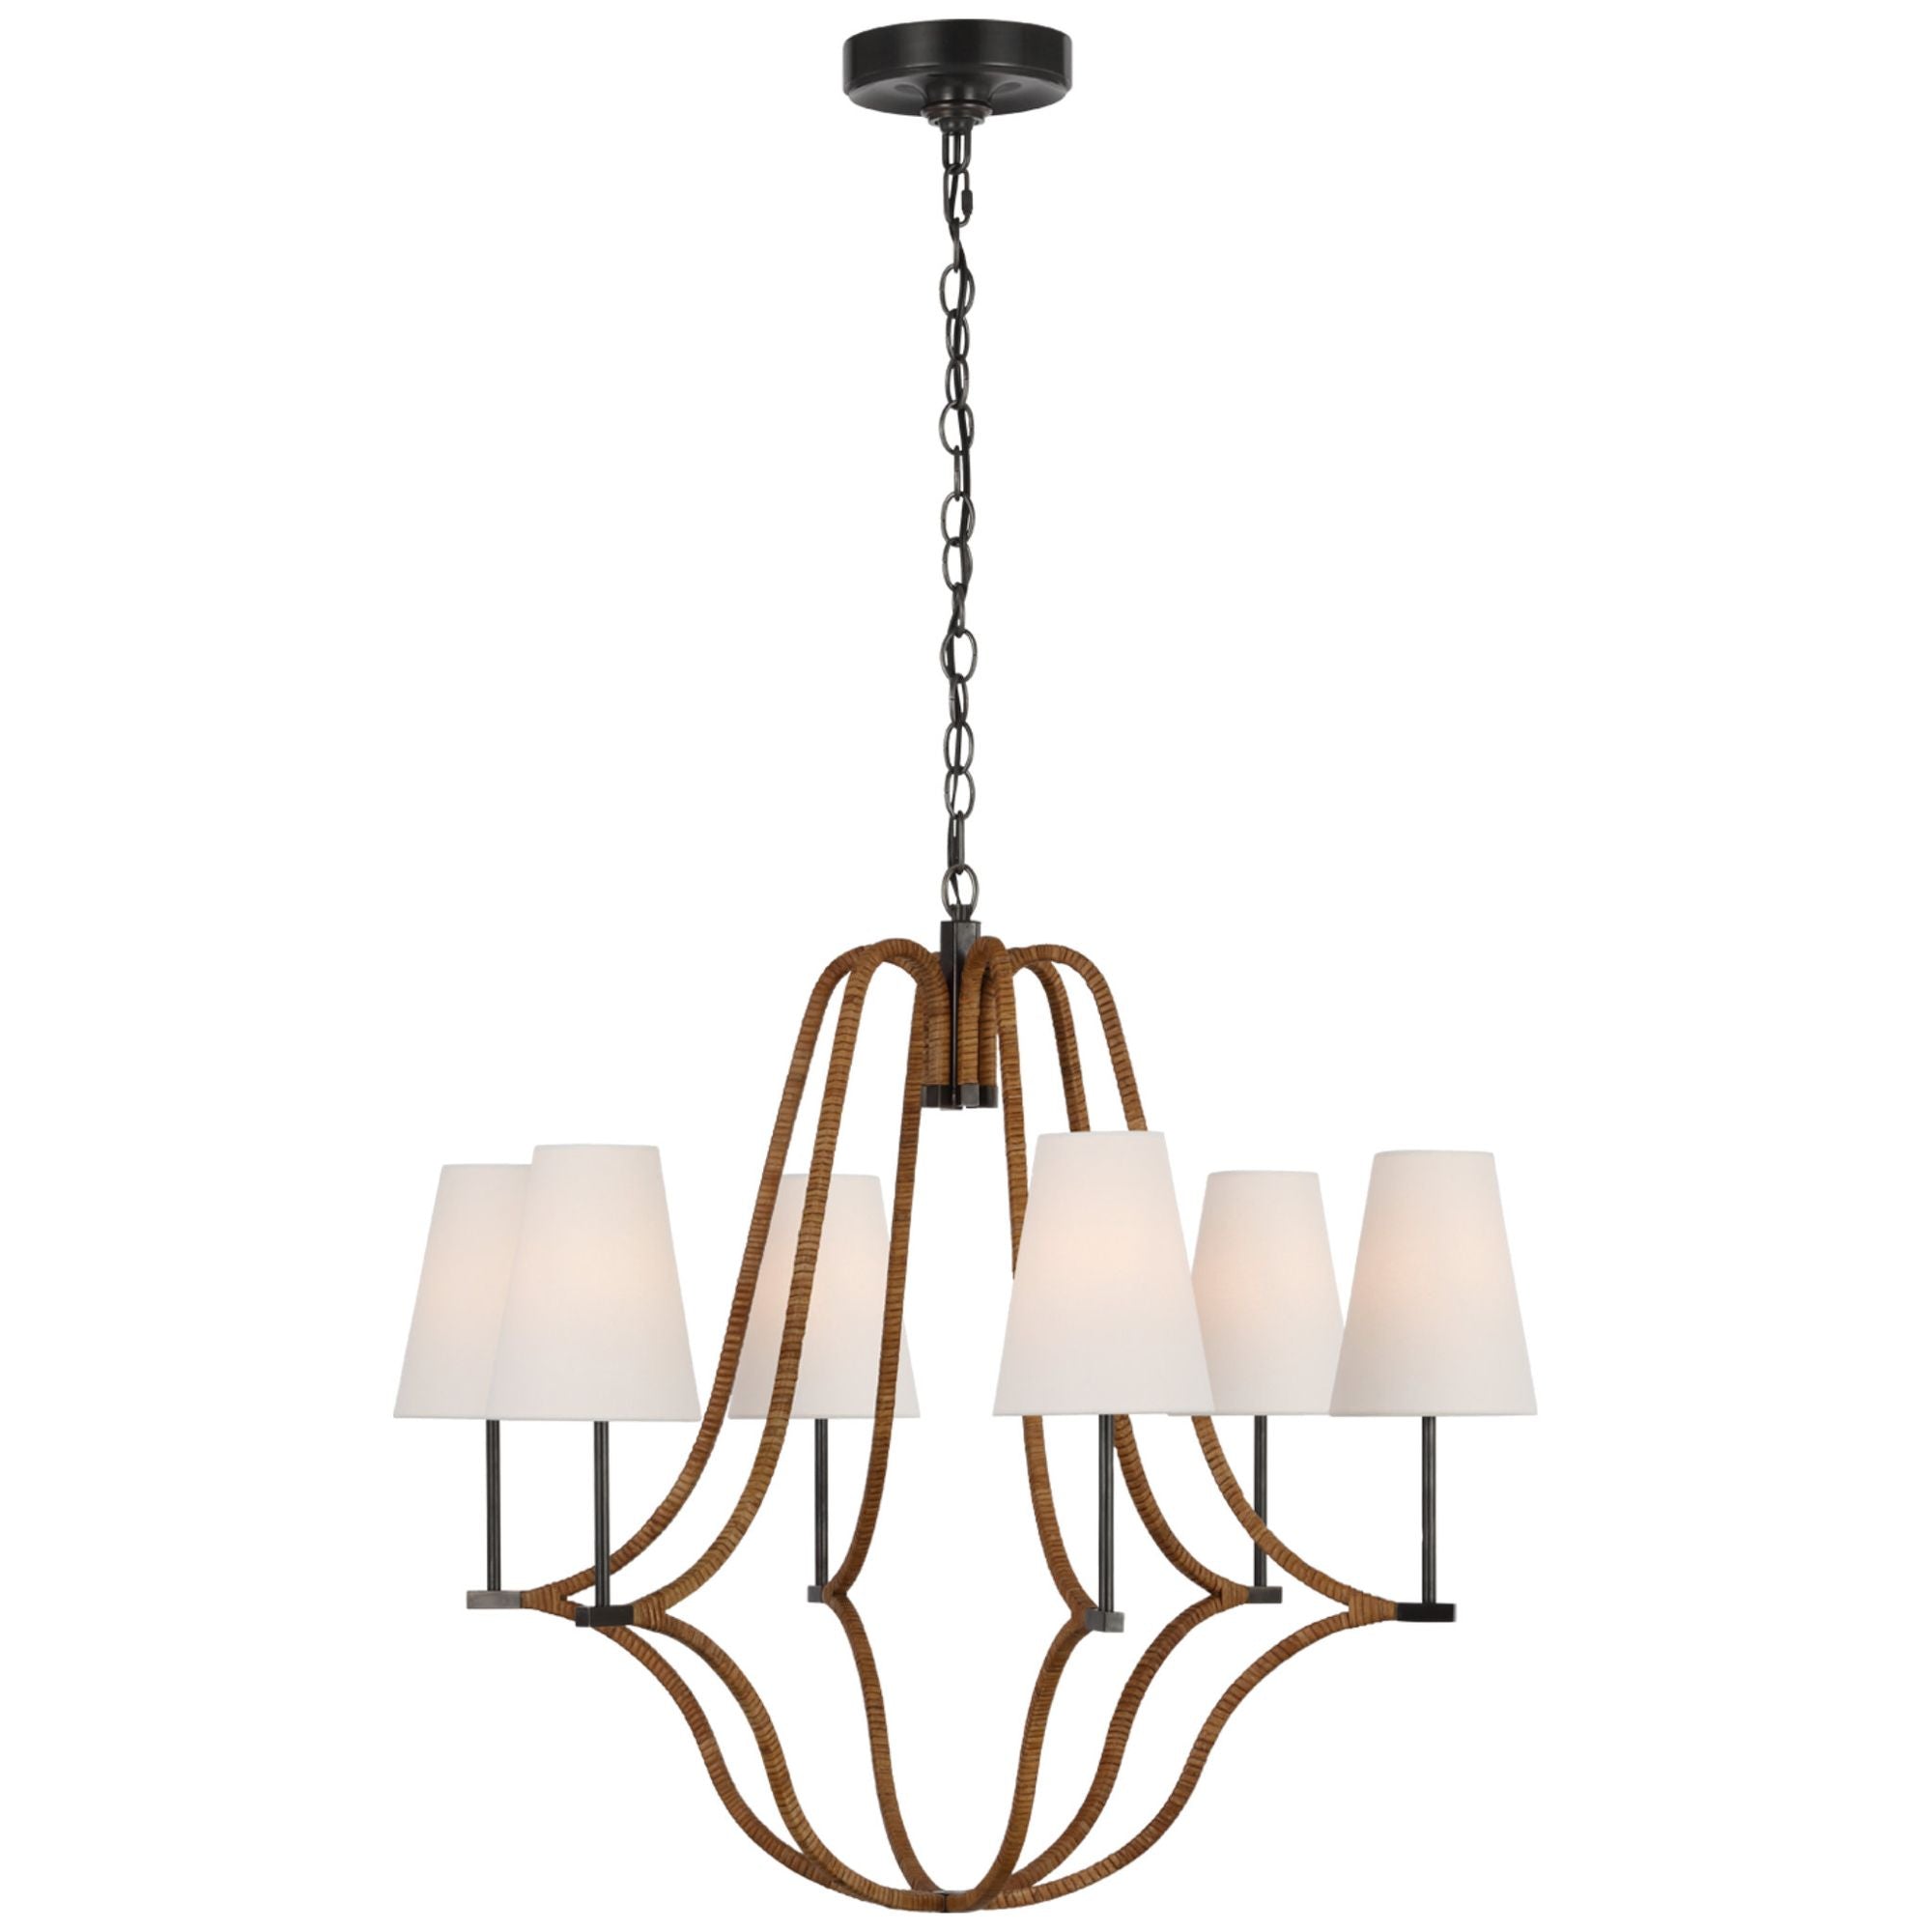 Chapman & Myers Biscayne Large Wrapped Chandelier in Bronze and Natural Rattan with Linen Shades